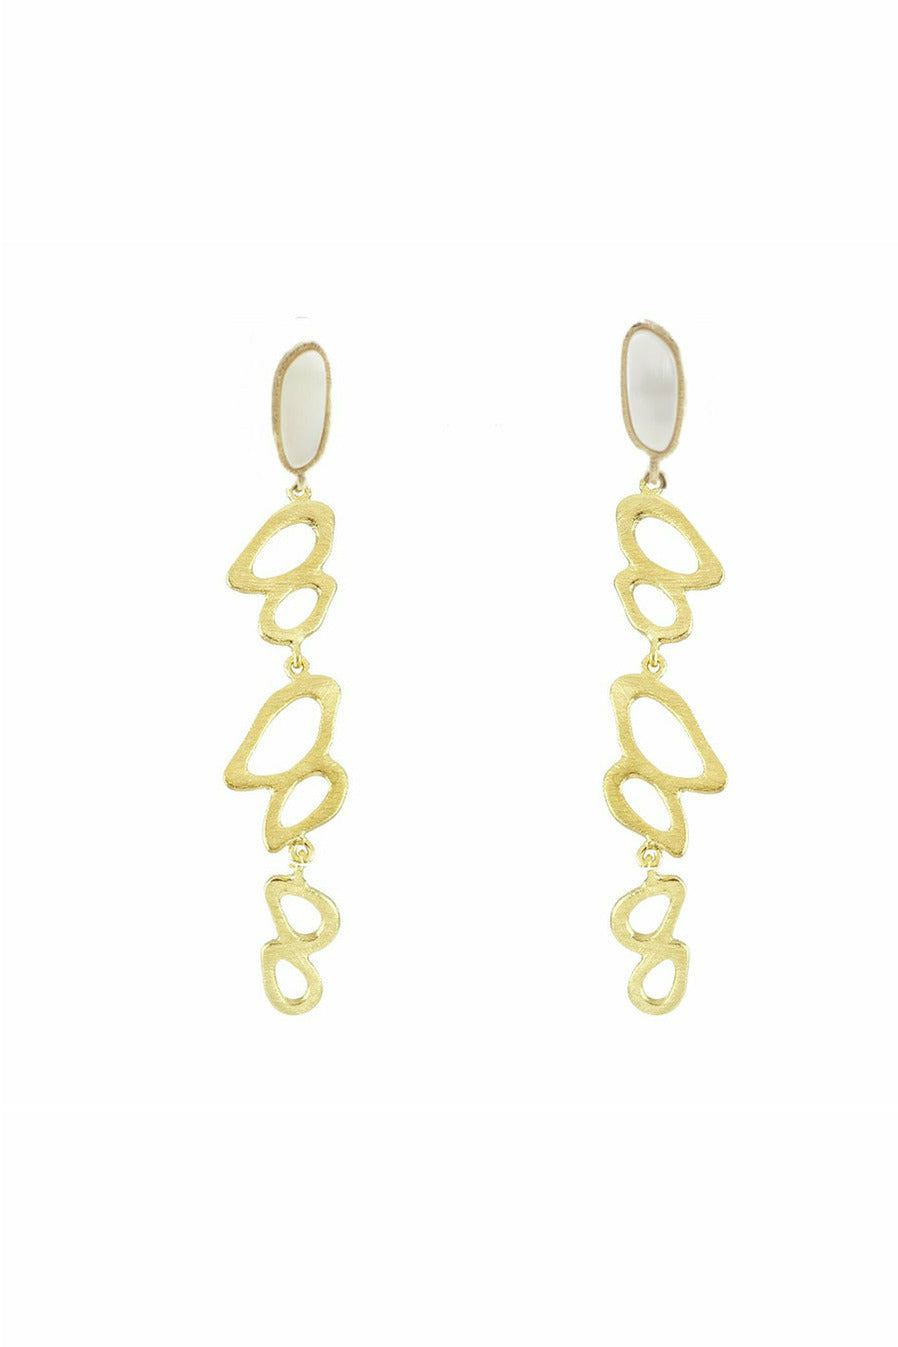 DALILA MOTHER OF PEARL ORNATE EARRING